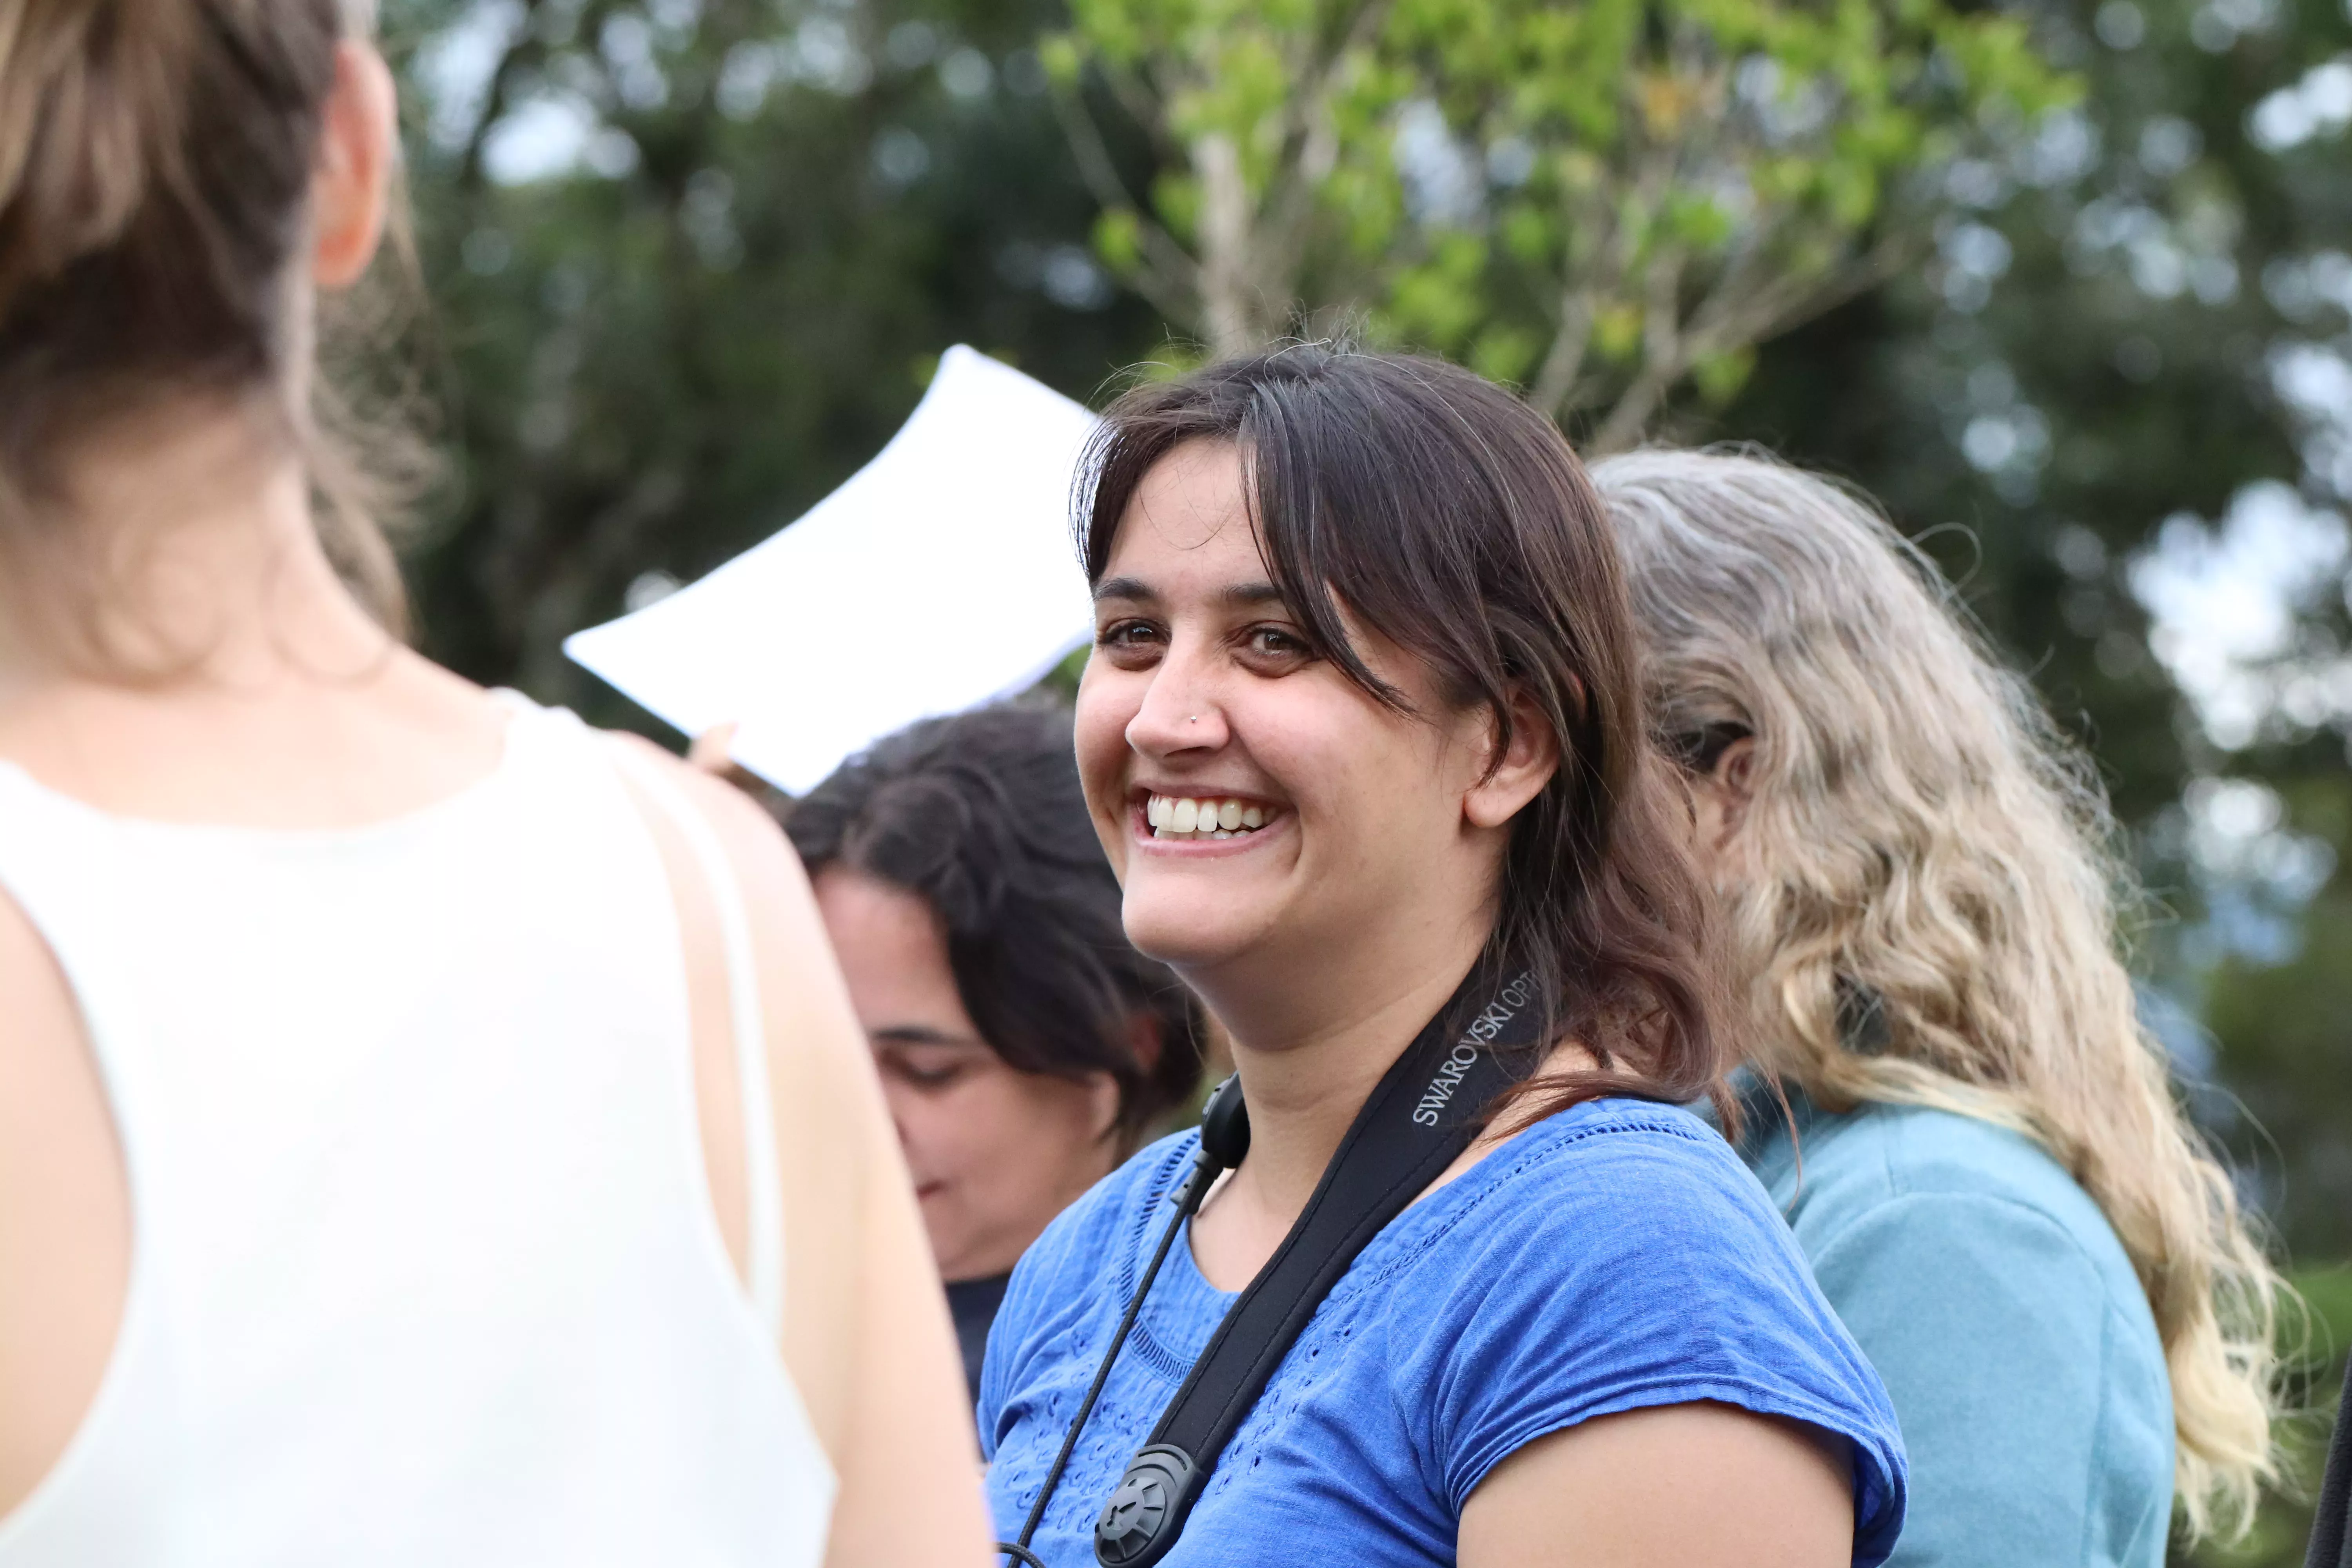 A young Indian woman smiling in a group of other women, looking past the camera, wearing a blue t-shirt and a camera strap. Lush trees in the background.